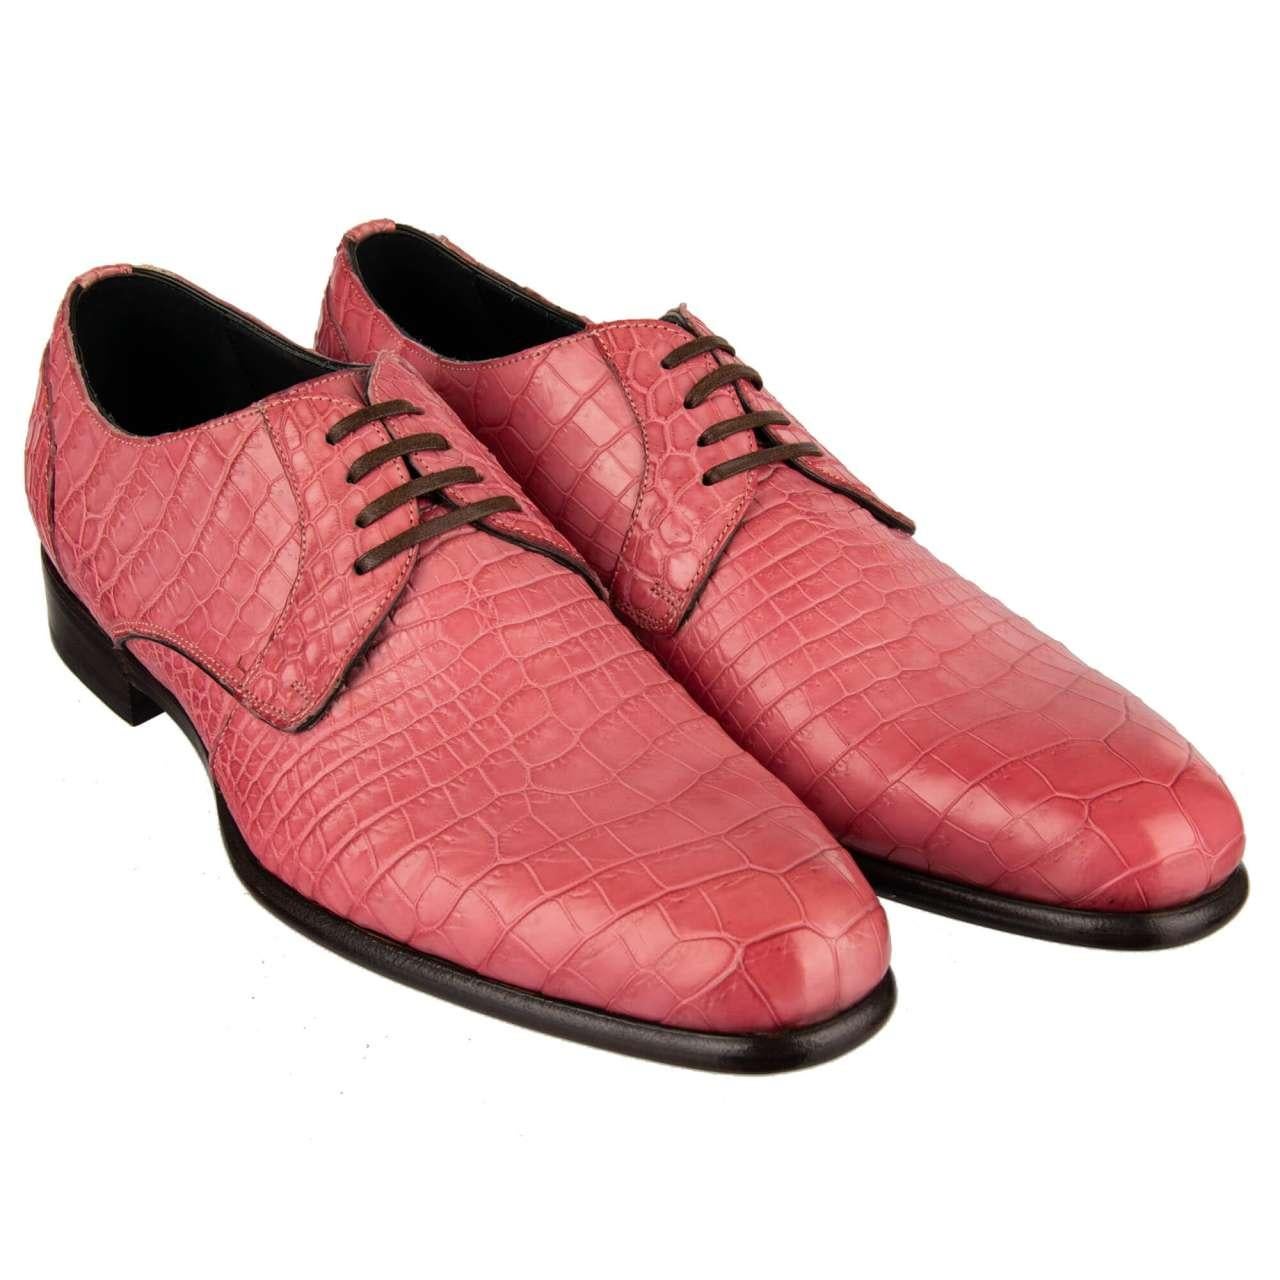 Dolce & Gabbana Crocodile Leather Derby Shoes SIENA Pink EUR 39 For Sale 2